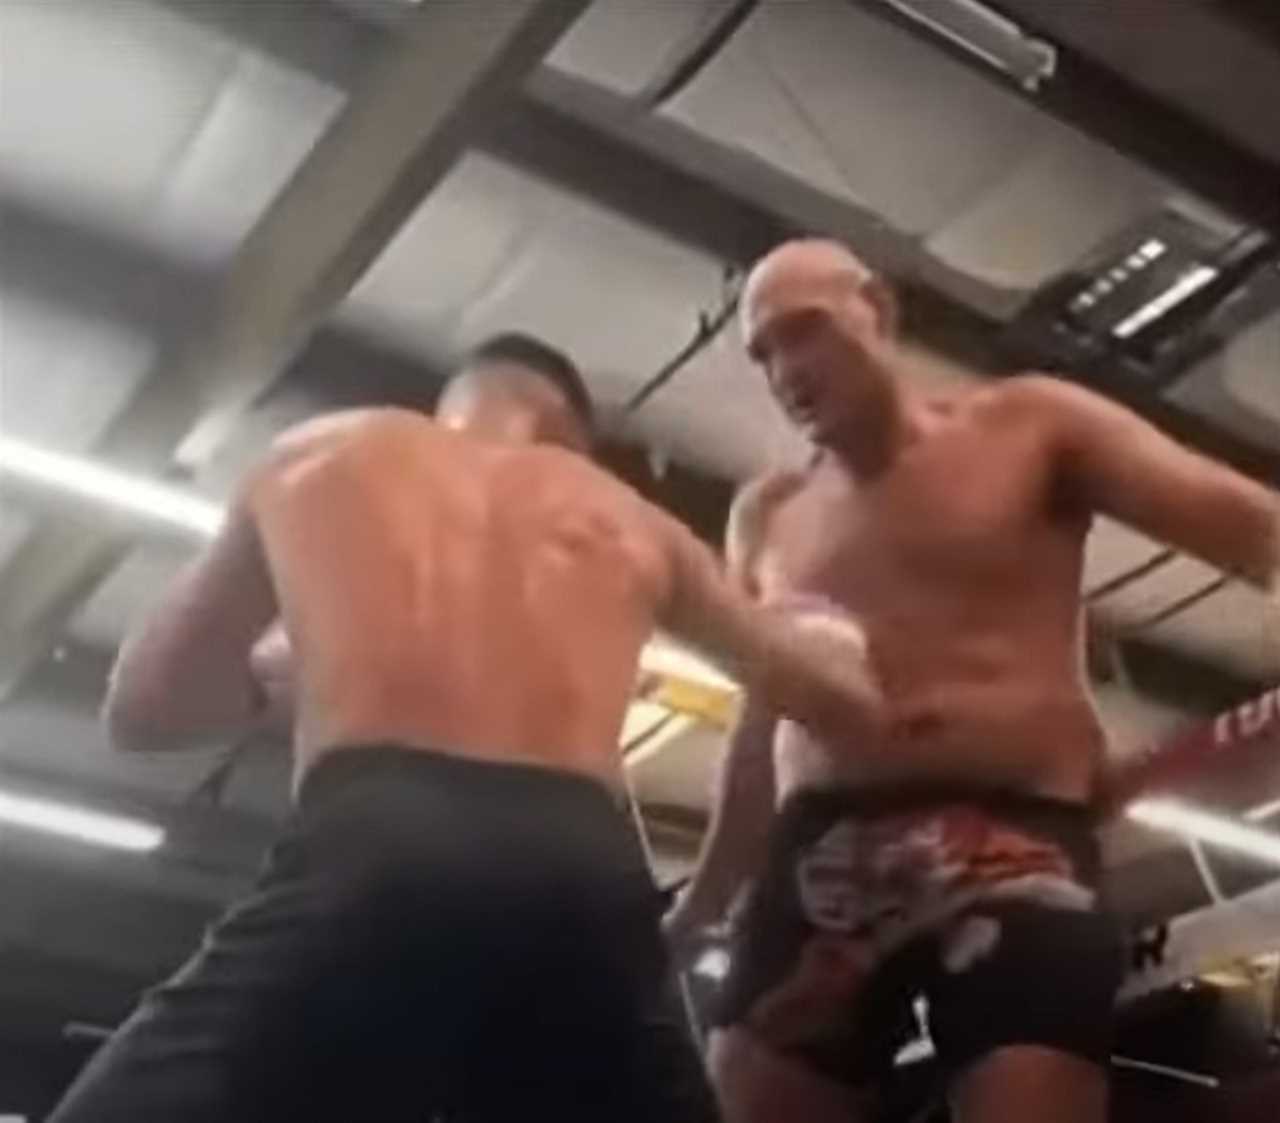 As talks with Oleksandr Uzyk continue, Tyson Fury takes Josh Taylor's intense body shots in leaked footage.